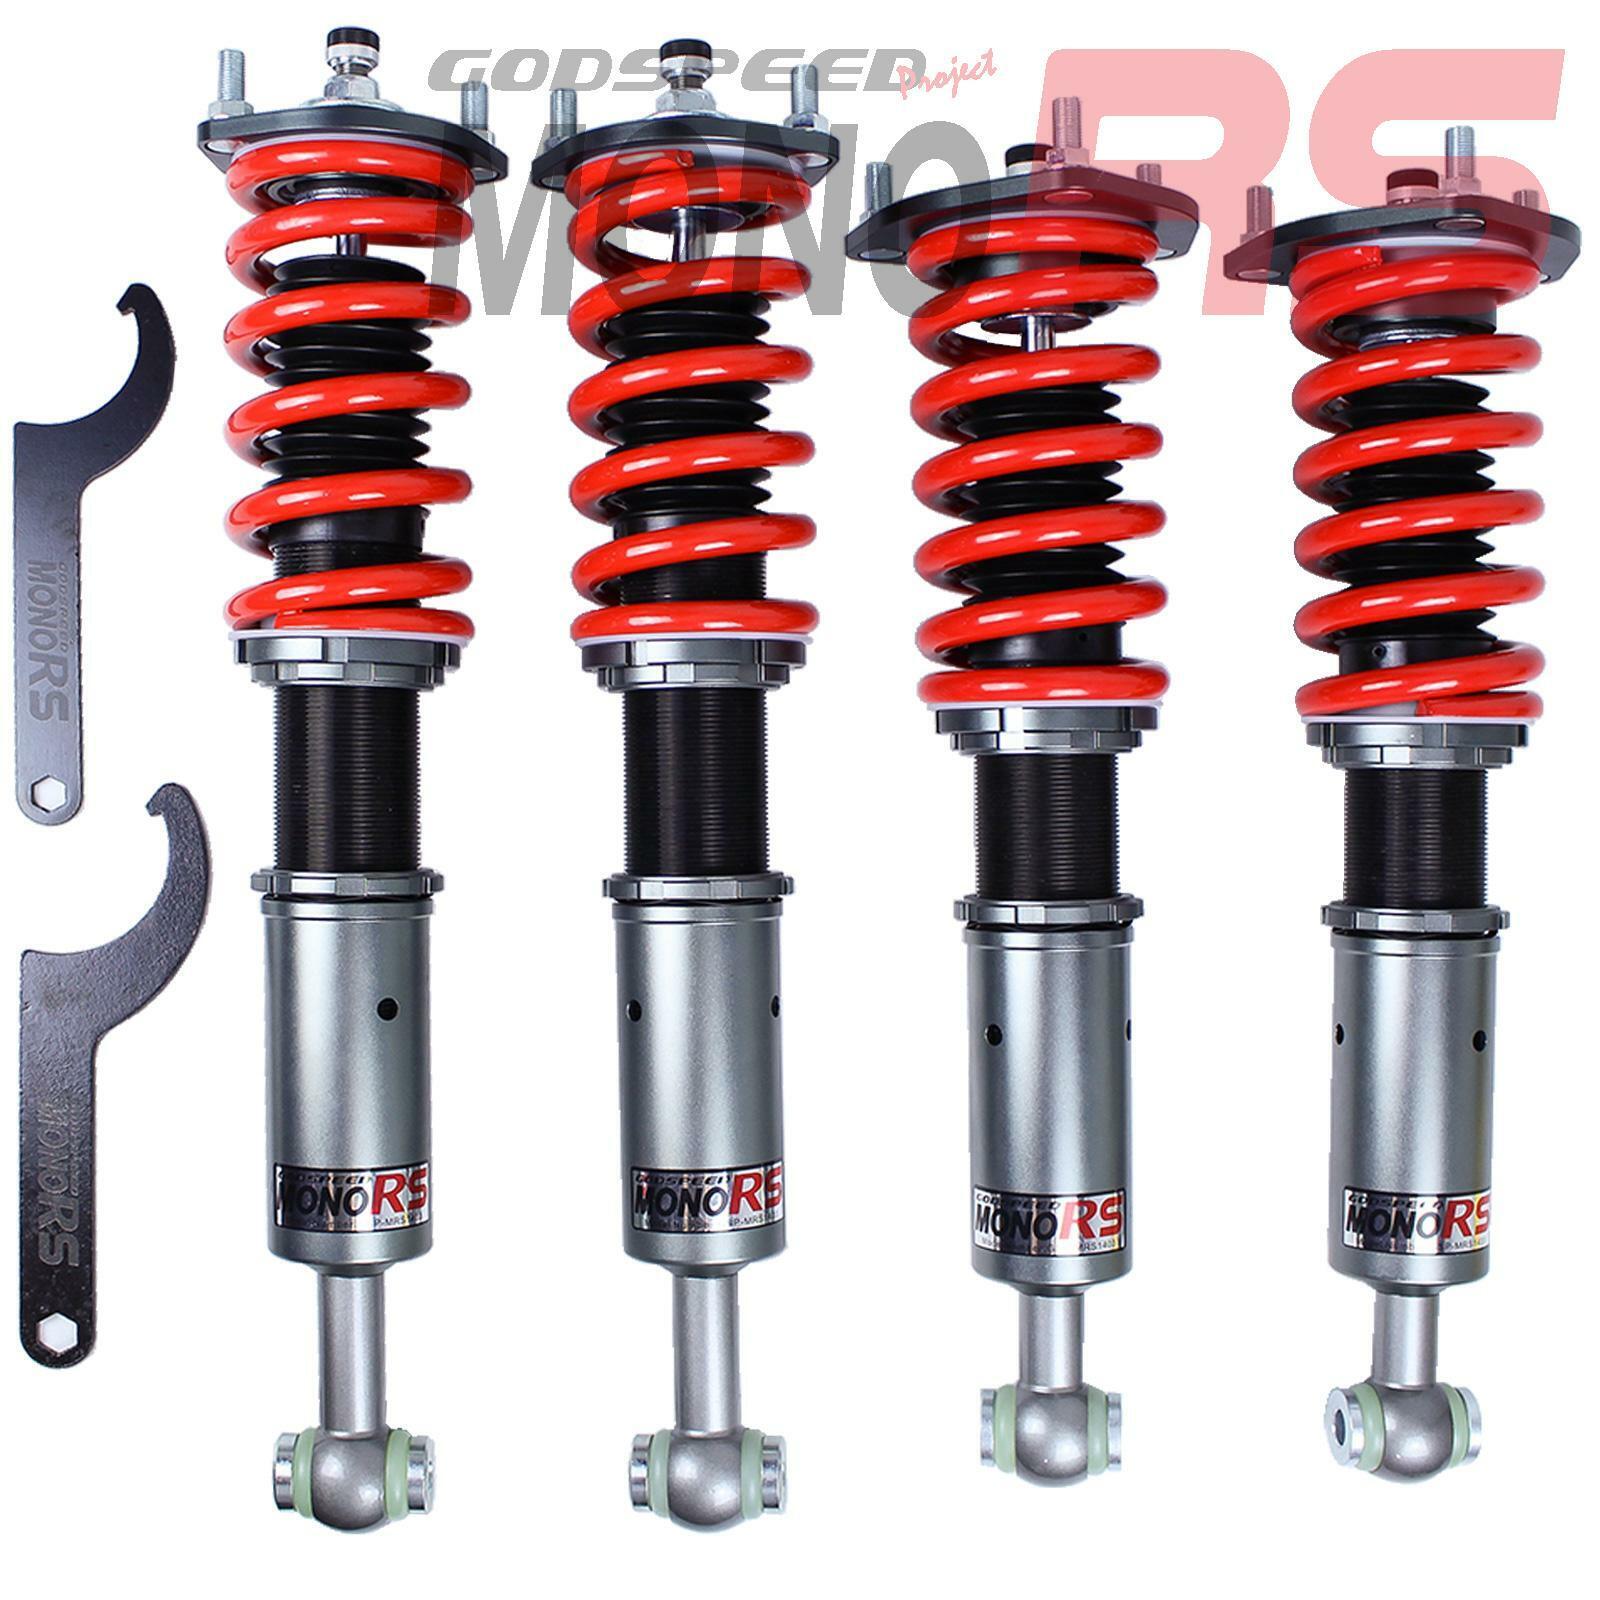 Godspeed(MRS1403) MonoRS Coilovers for Lexus SC430 02-10(UZZ40),Fully Adjustable